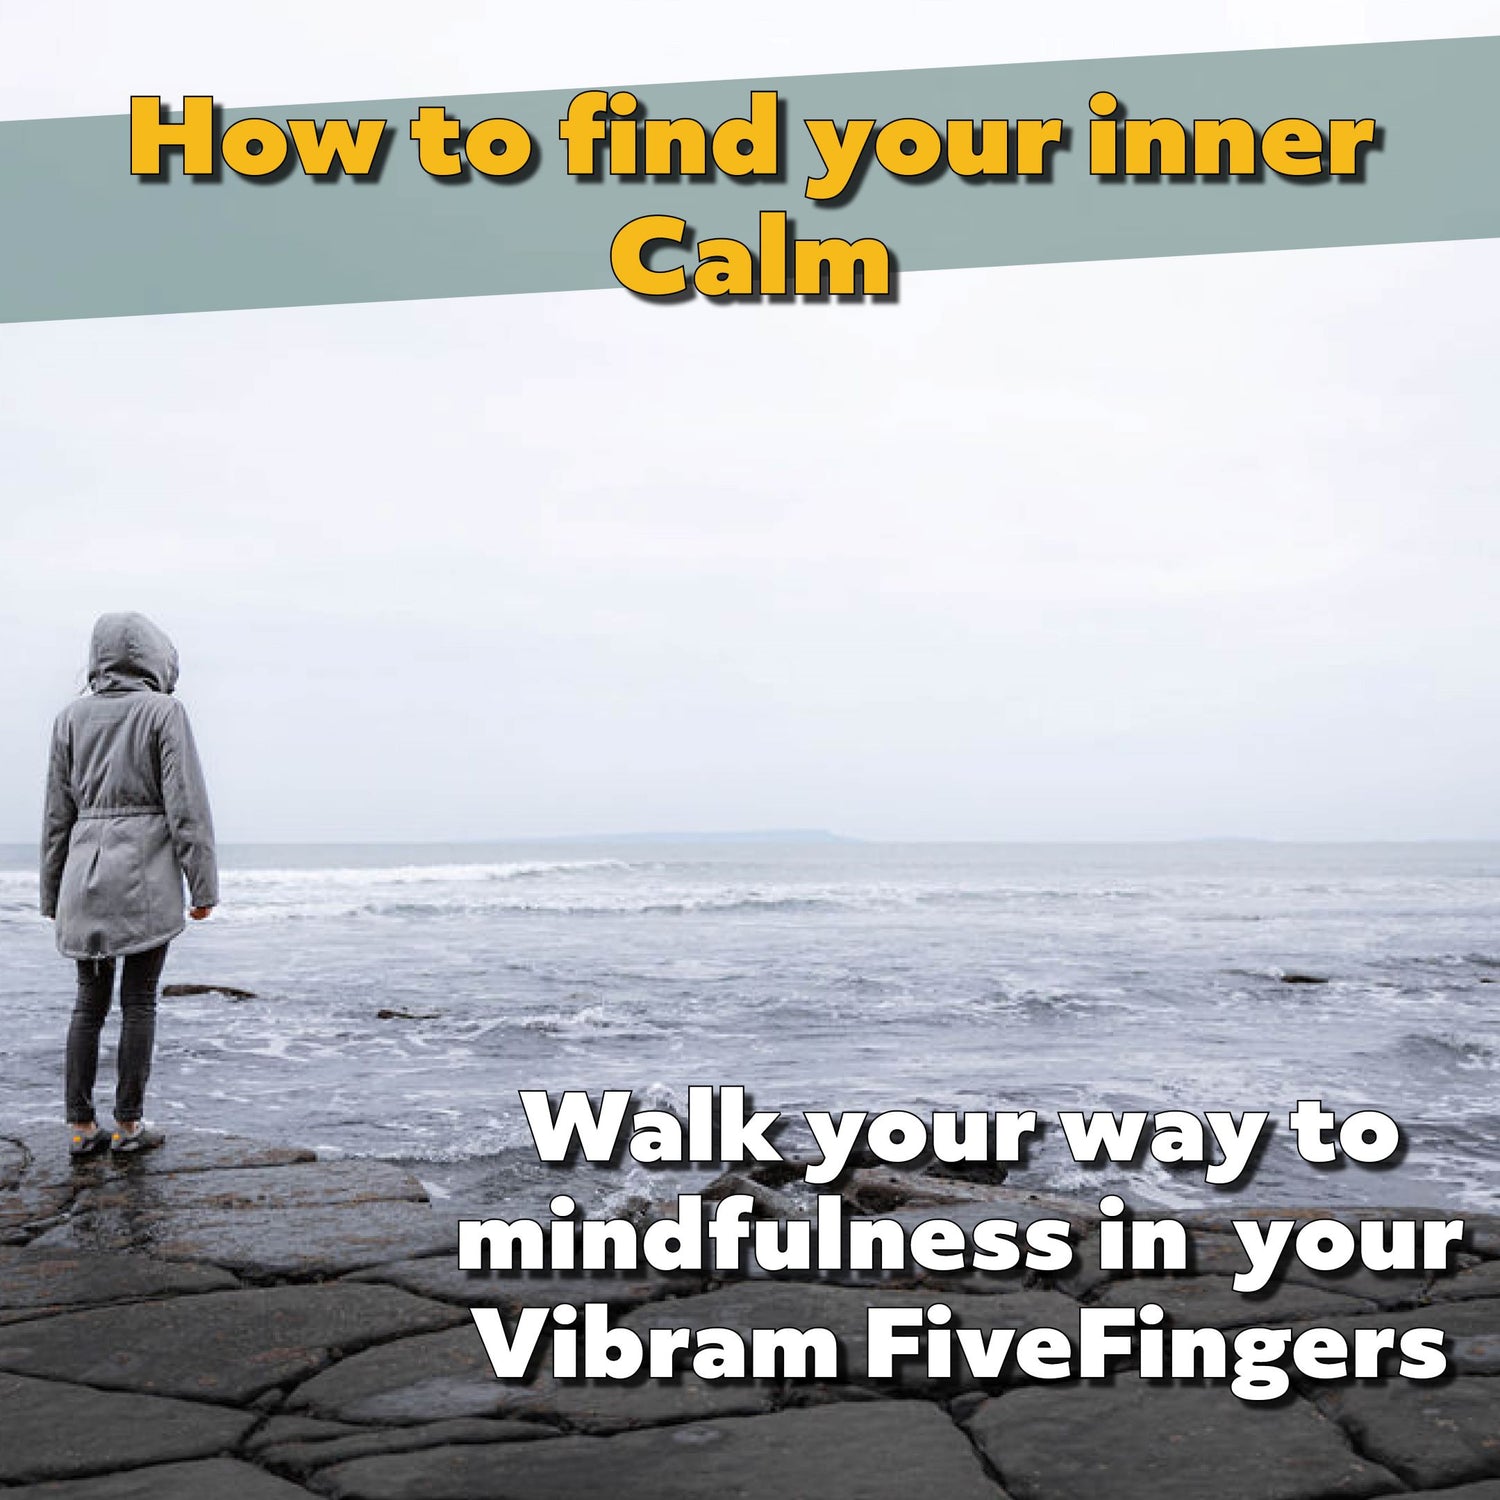 Walking your way to mindfulness with Vibram FiveFingers shoes